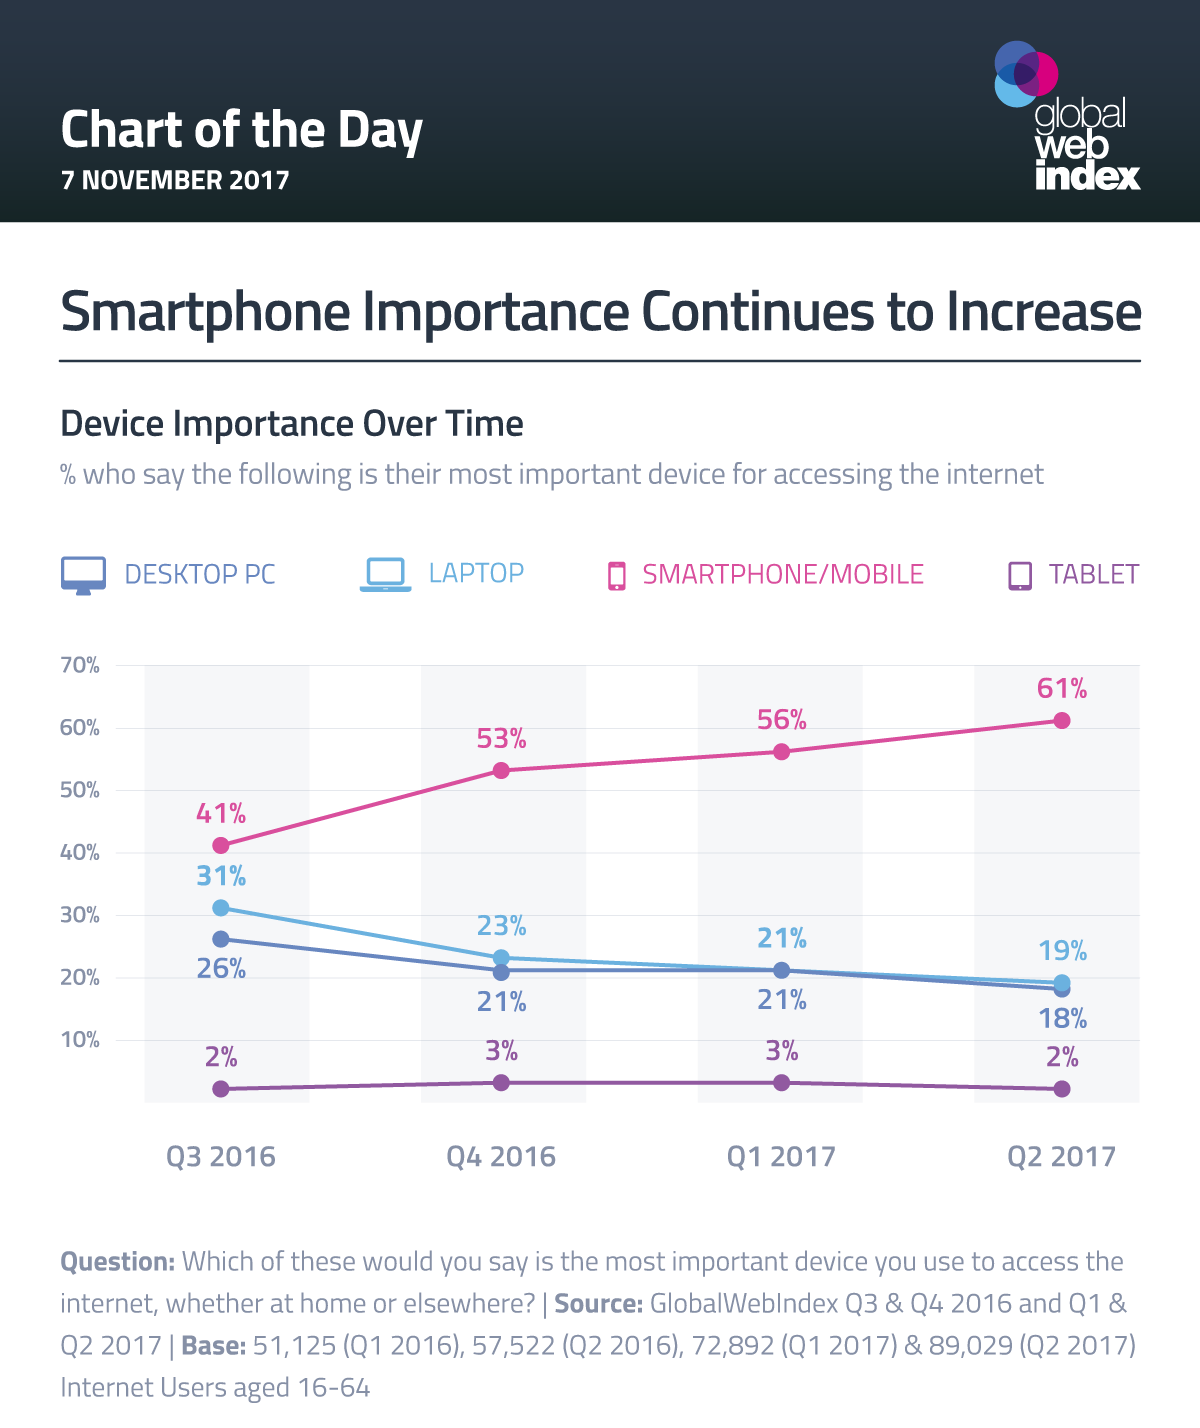 Smartphone Importance Continues to Increase